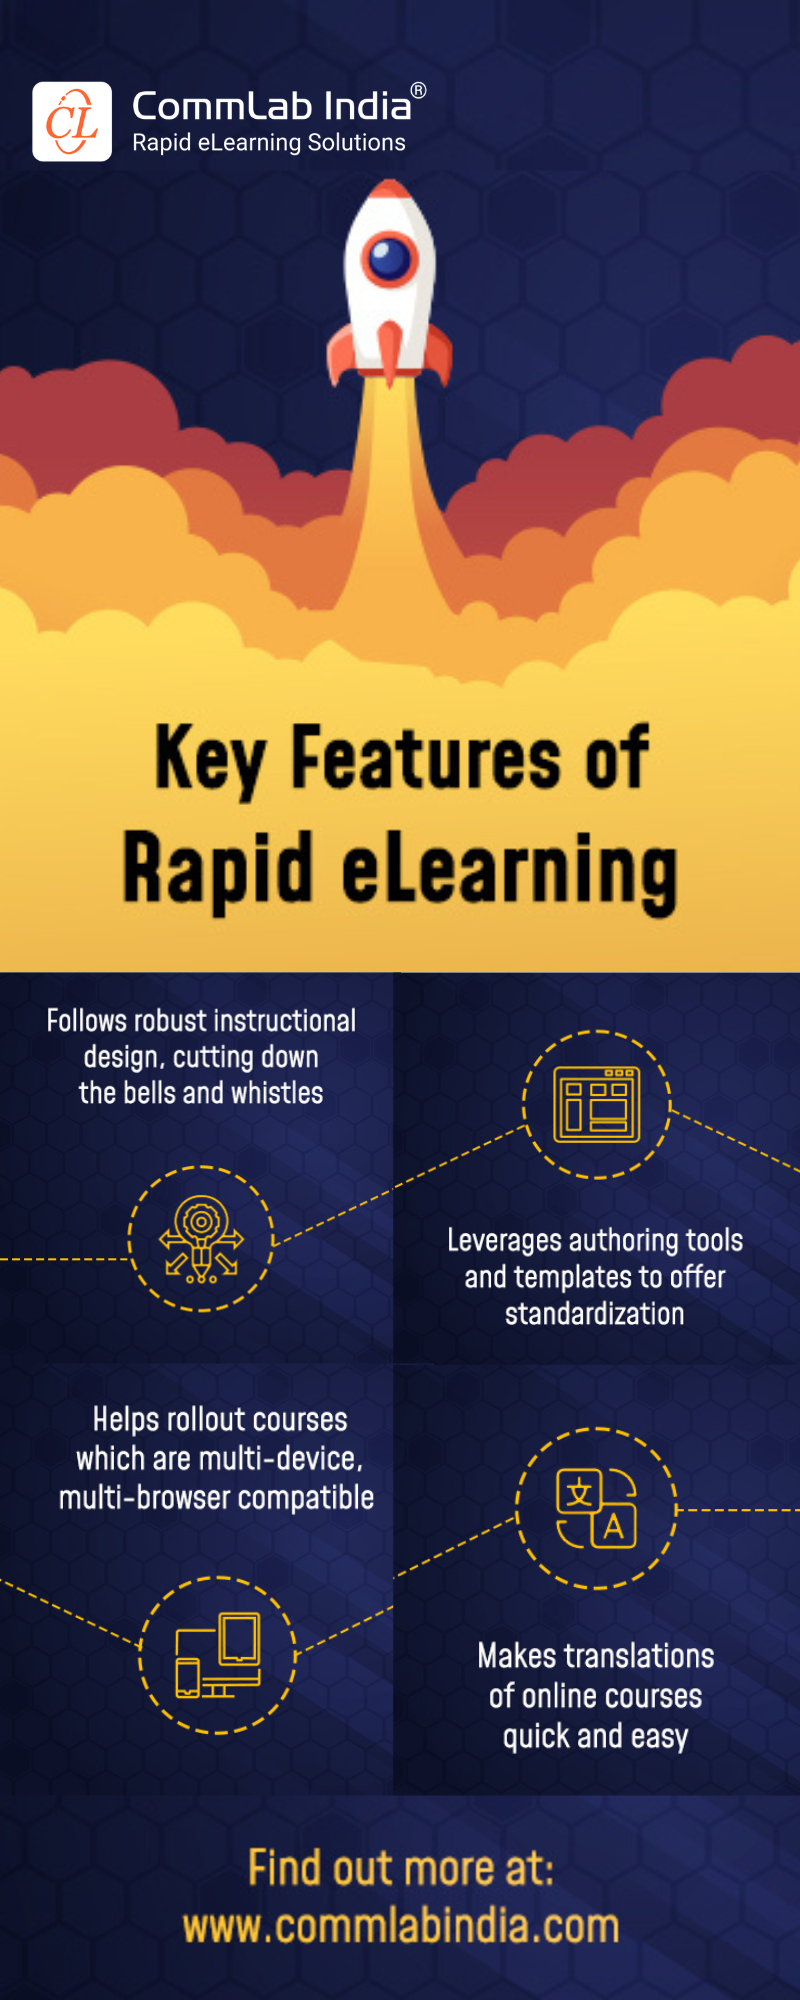 Key Features of Rapid eLearning